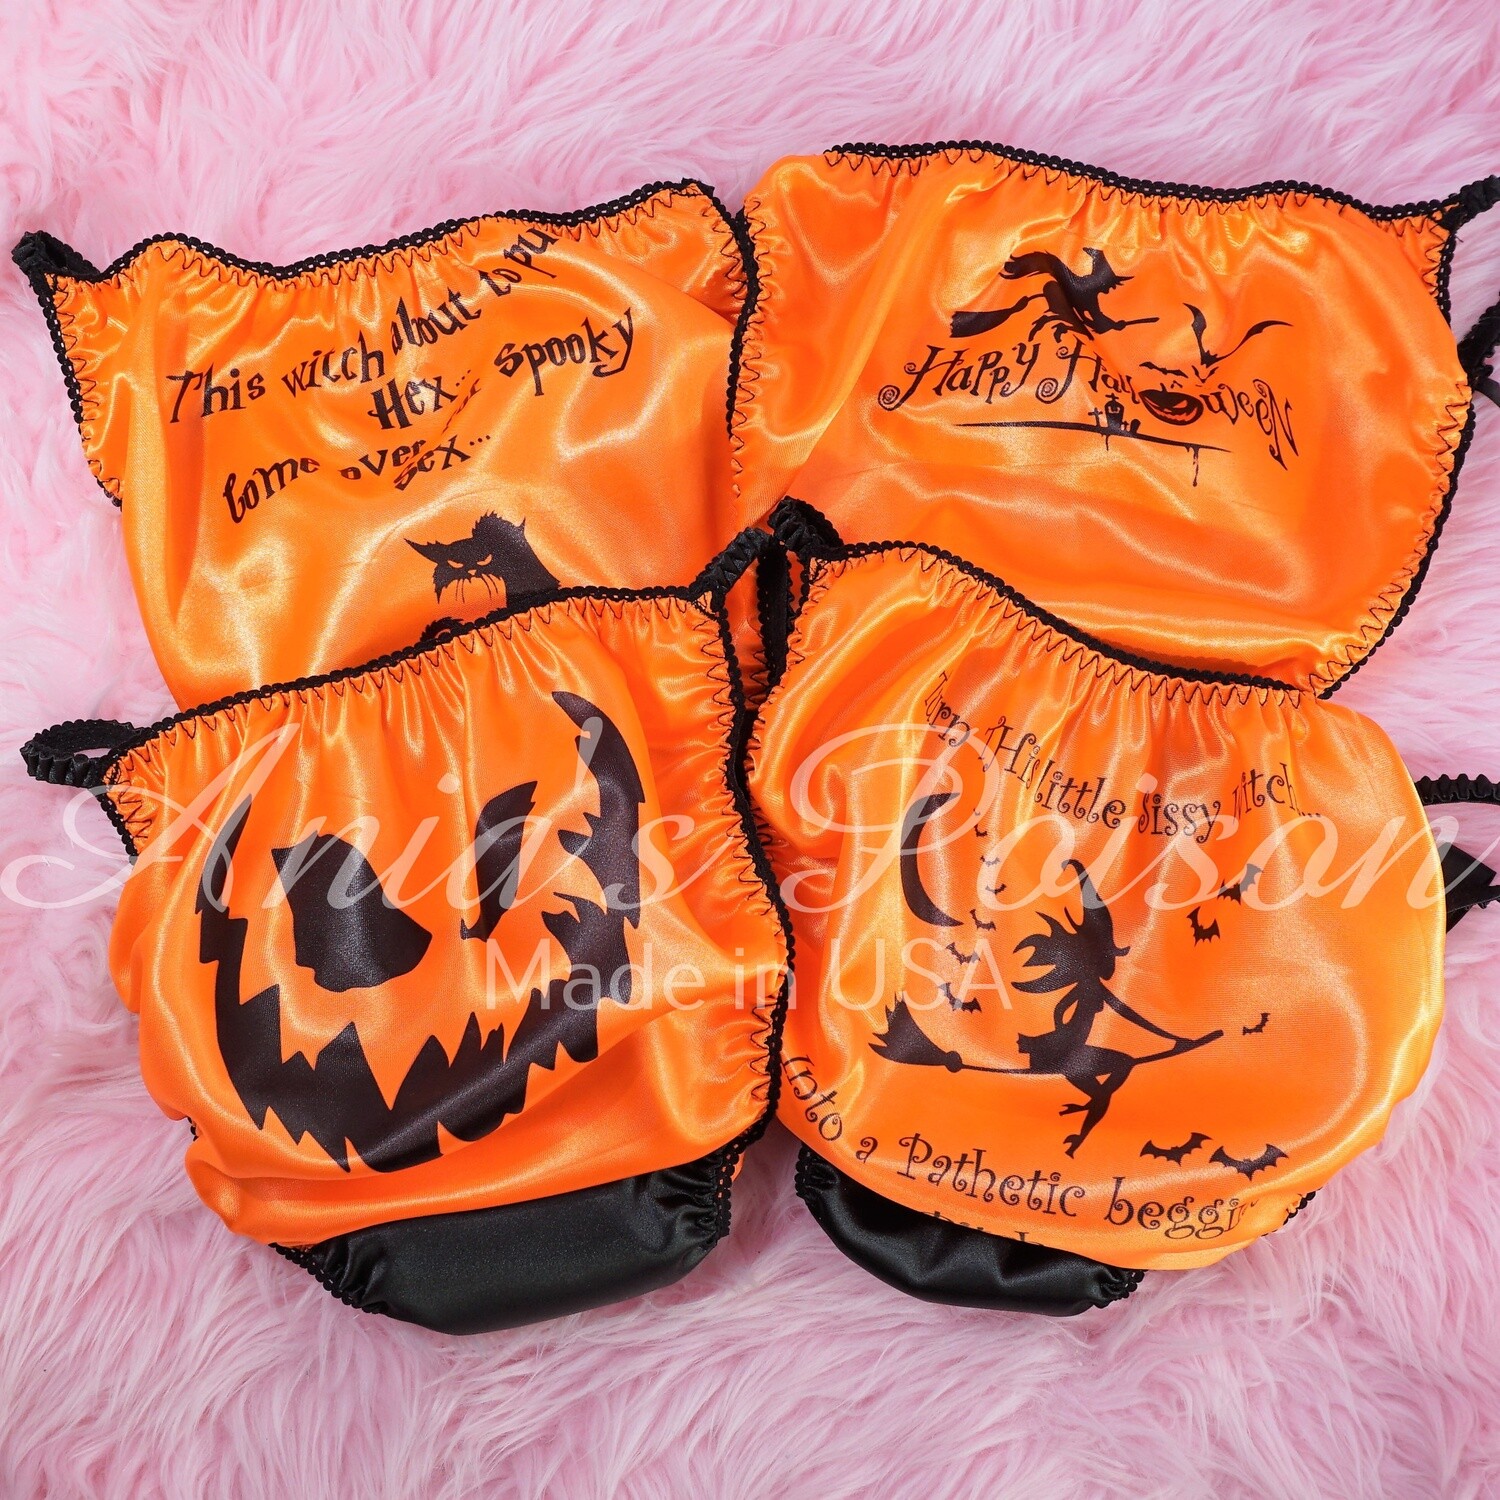 Ania's Poison HALLOWEEN Panties Jack-o-lantern face, spooky cat, Sissy Poem, flying Witch 5 Choices! 100% polyester SATIN string bikini sissy MENS underwear panties